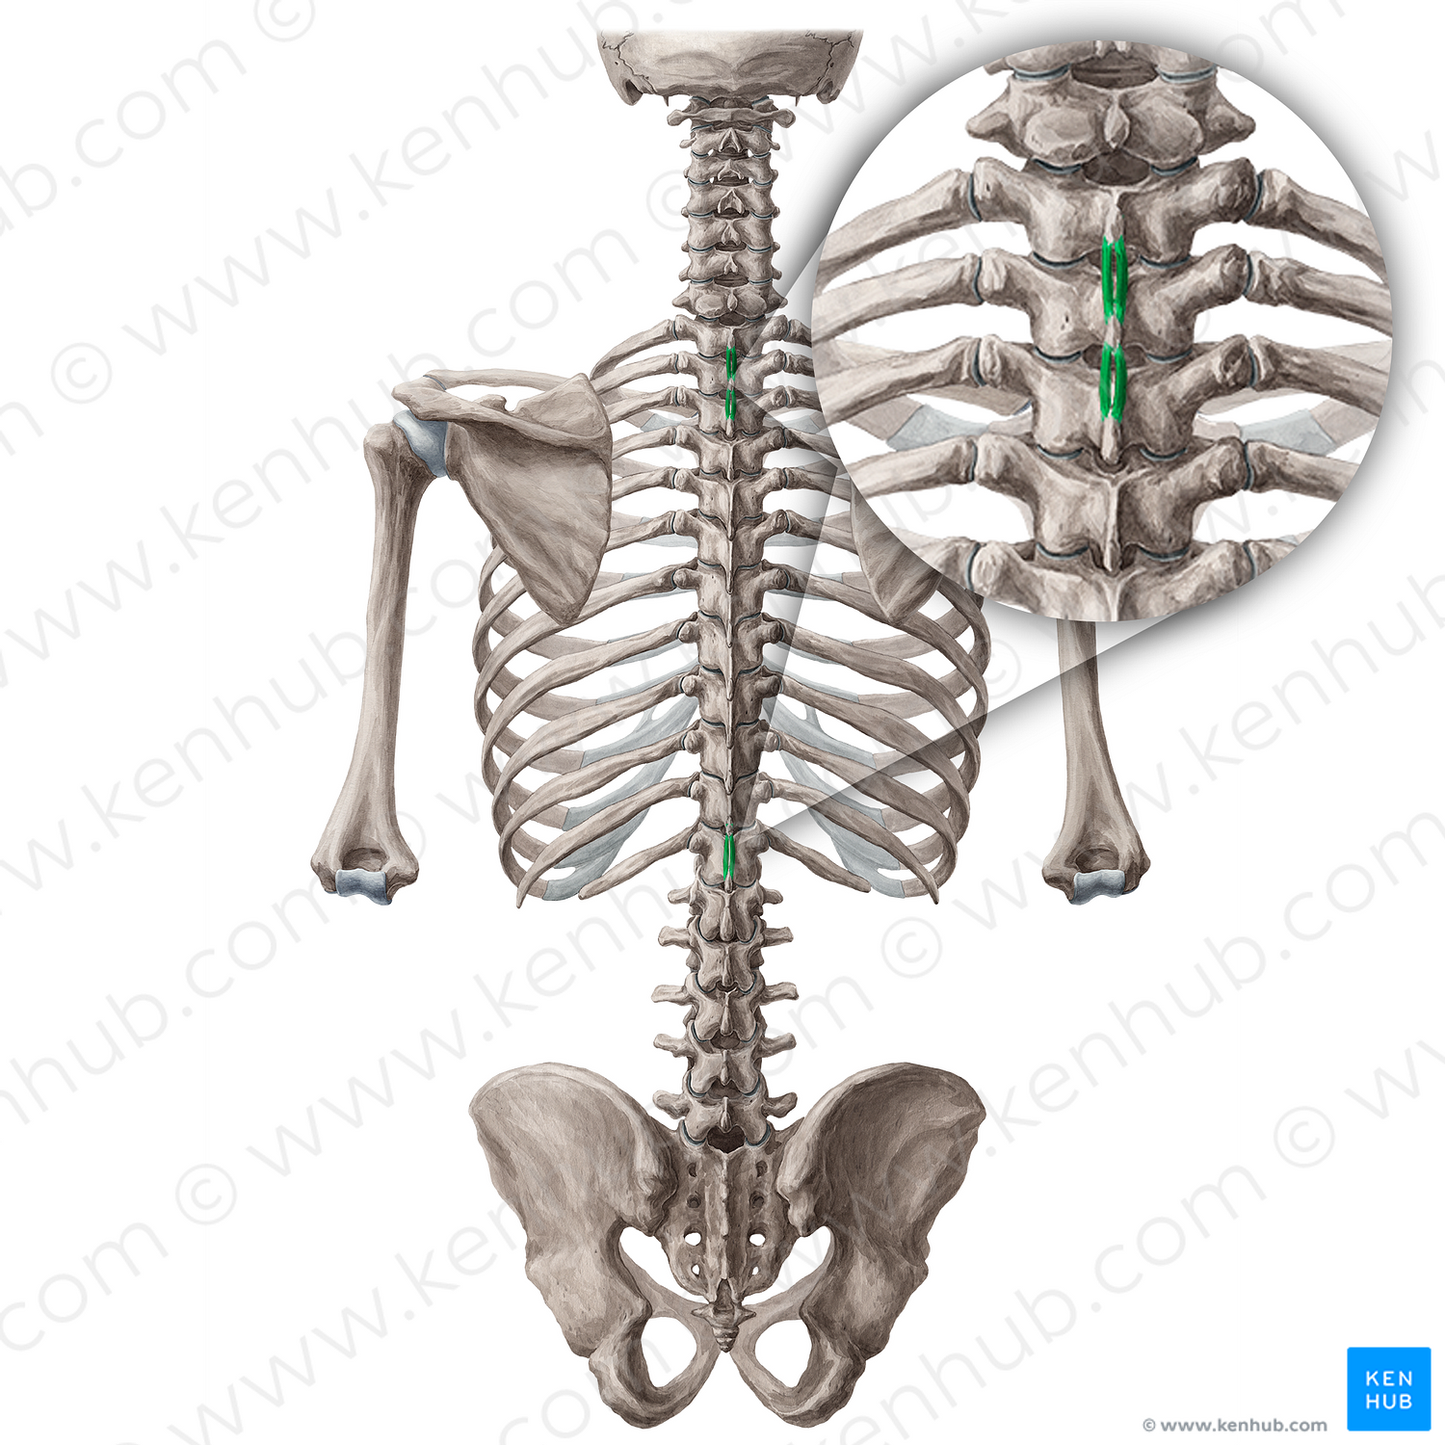 Interspinales thoracis muscles (#5141)